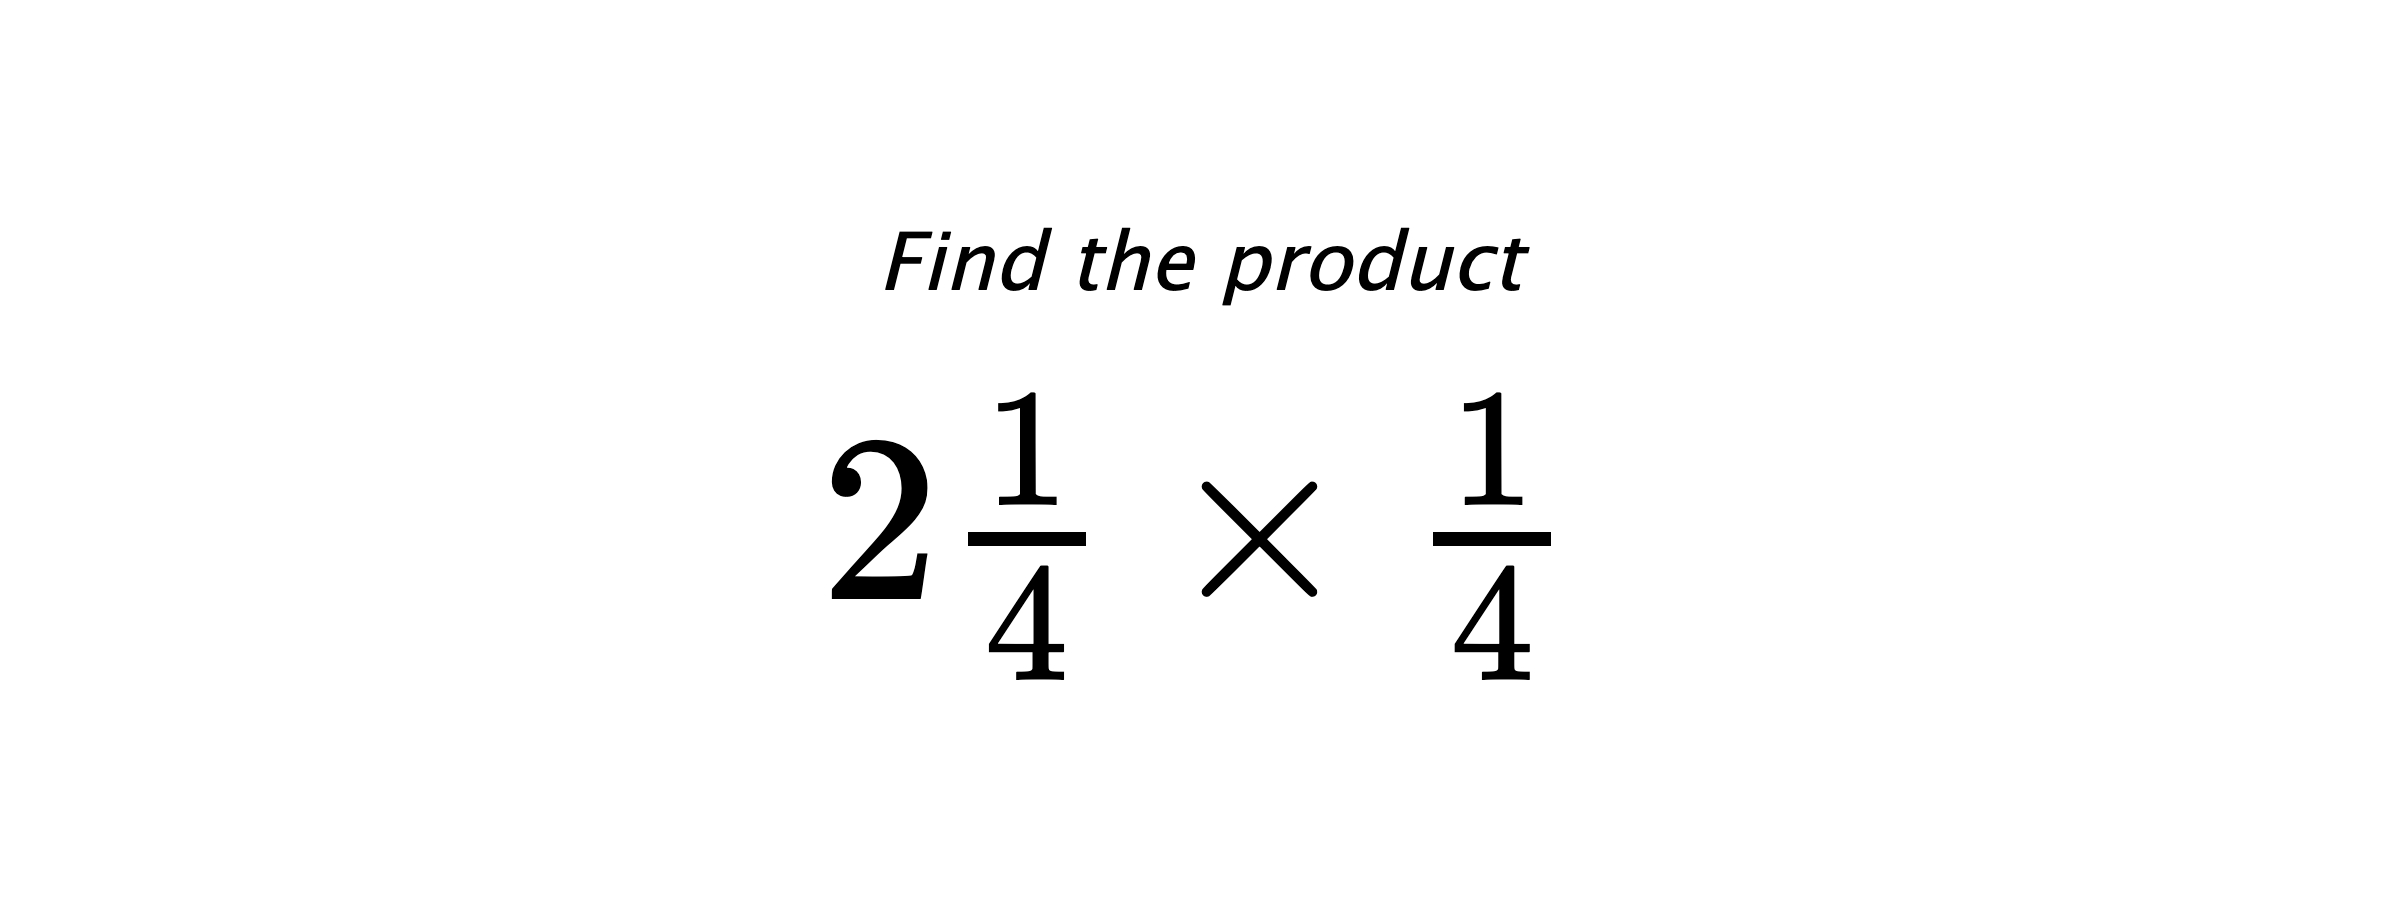 Find the product $ 2\frac{1}{4} \times \frac{1}{4} $